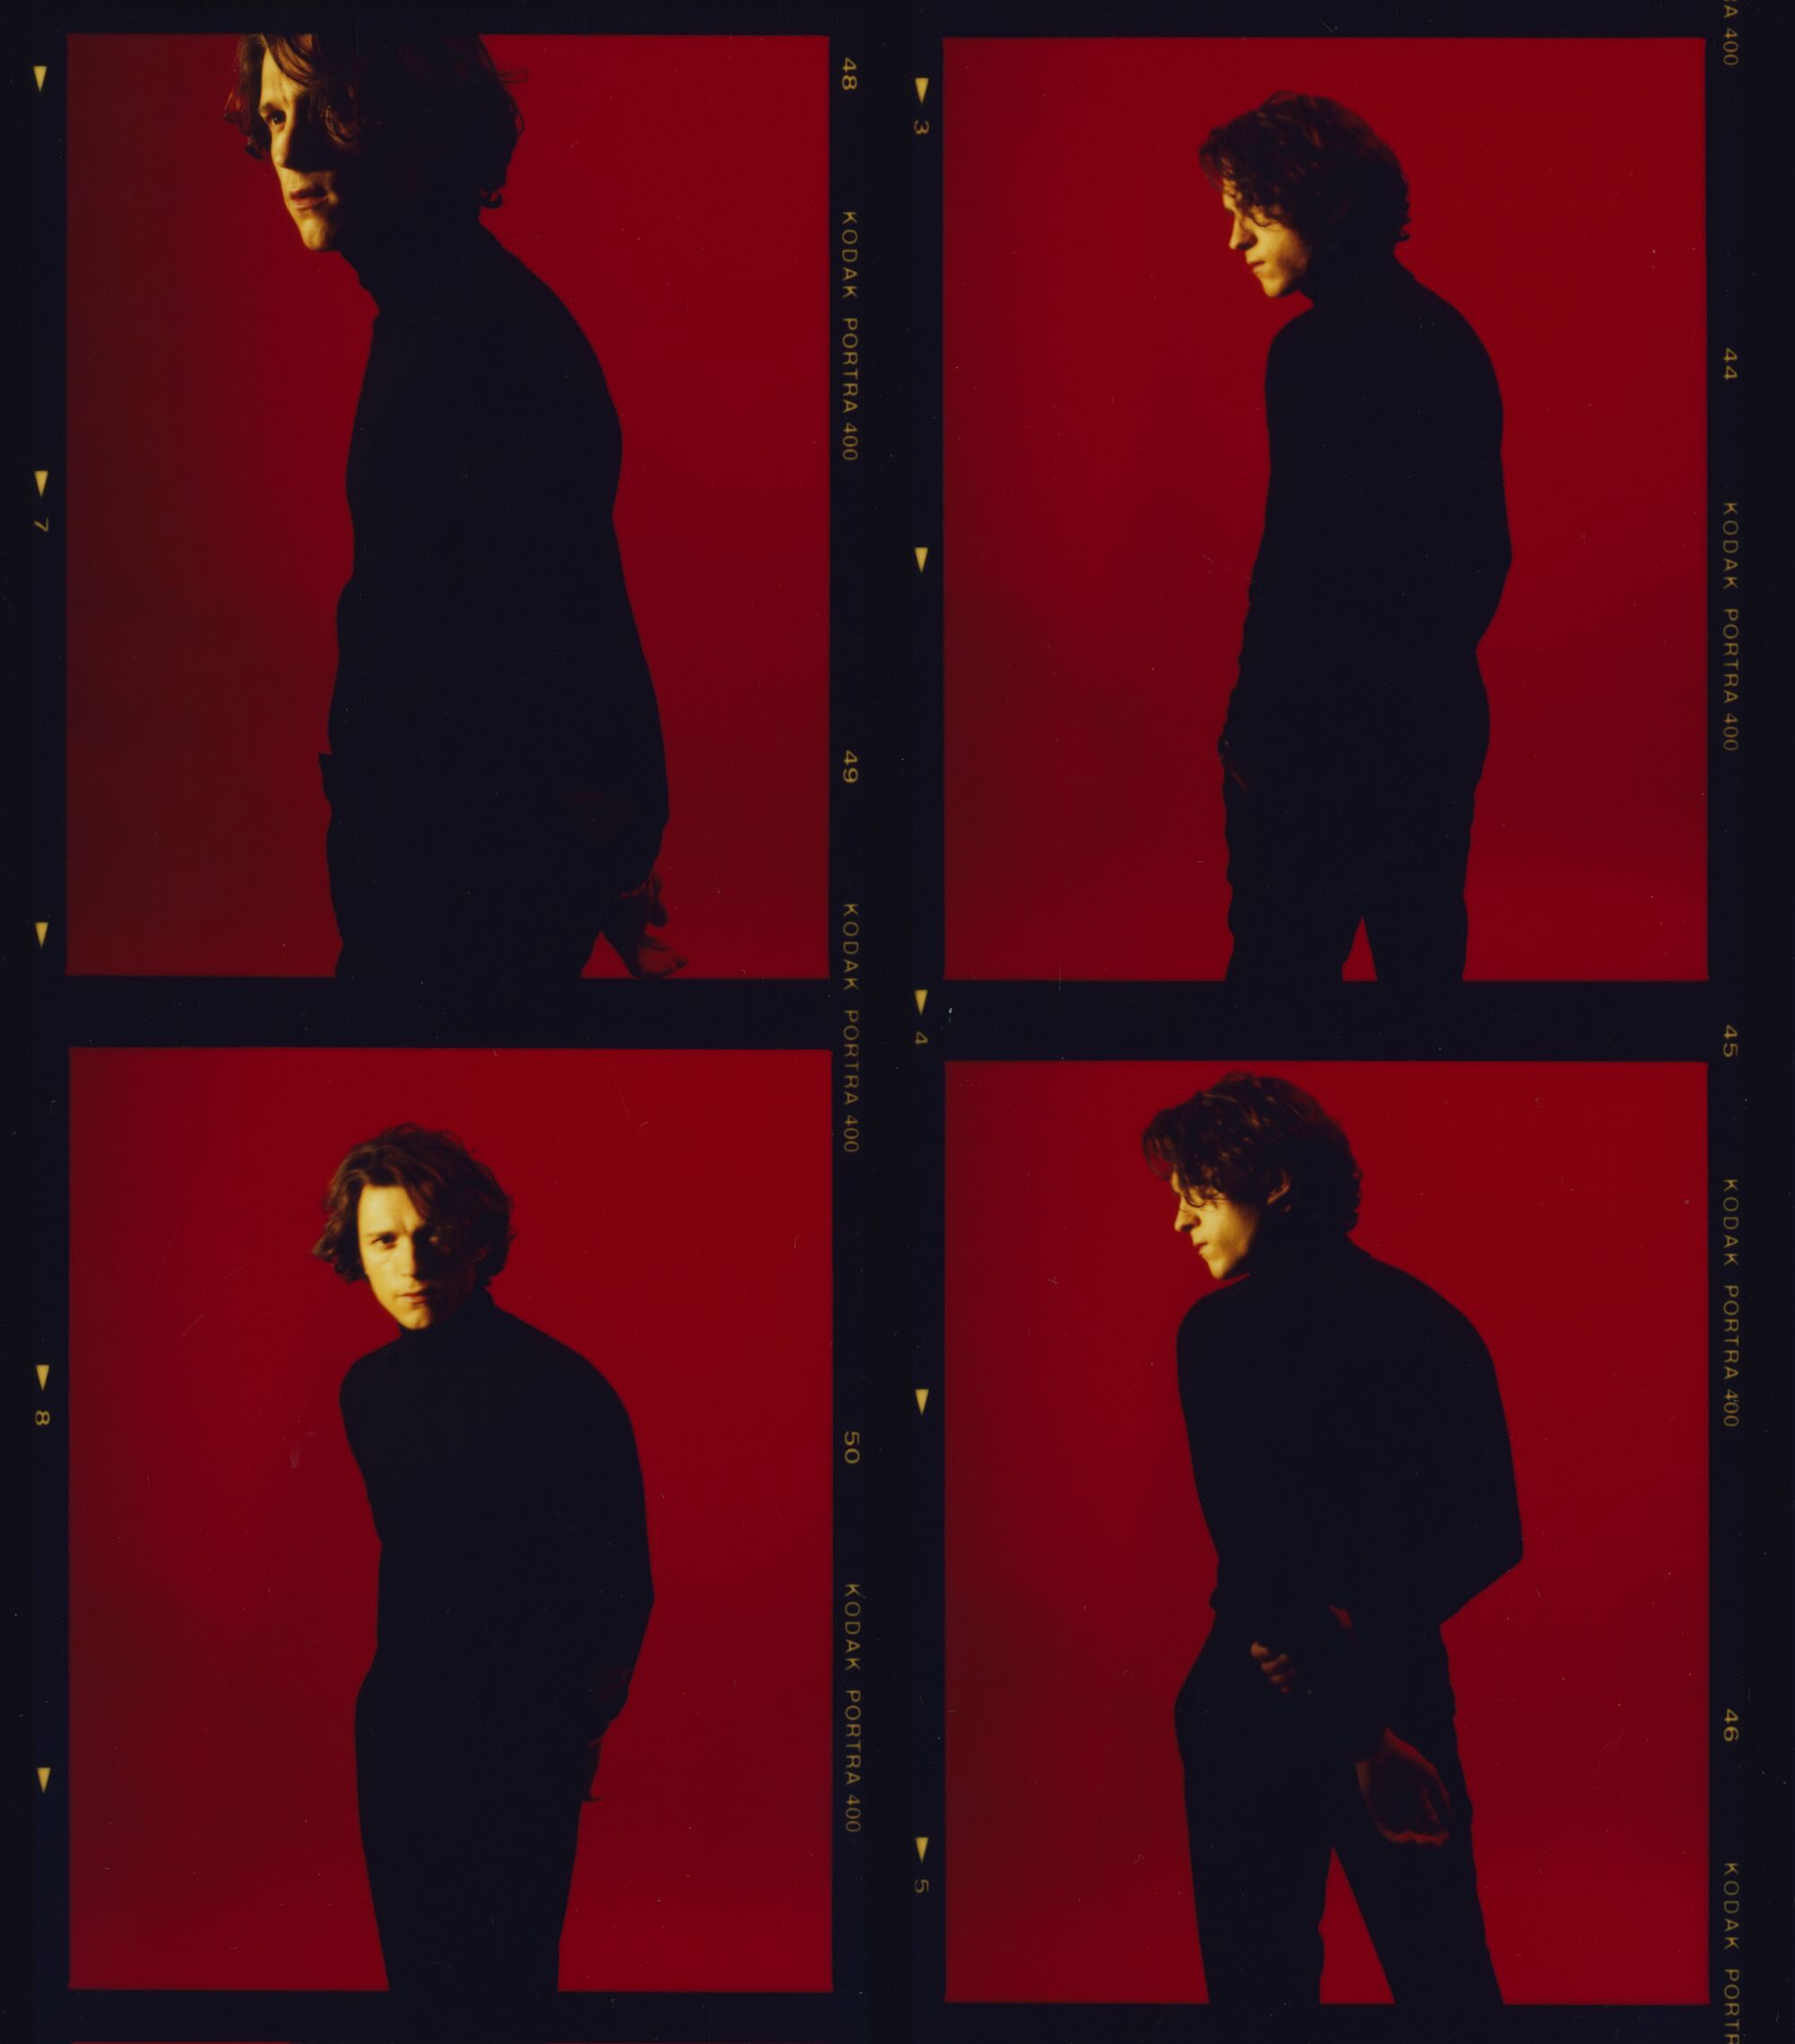  Four panels show photo portraits of Tom Holland against a deep red background.